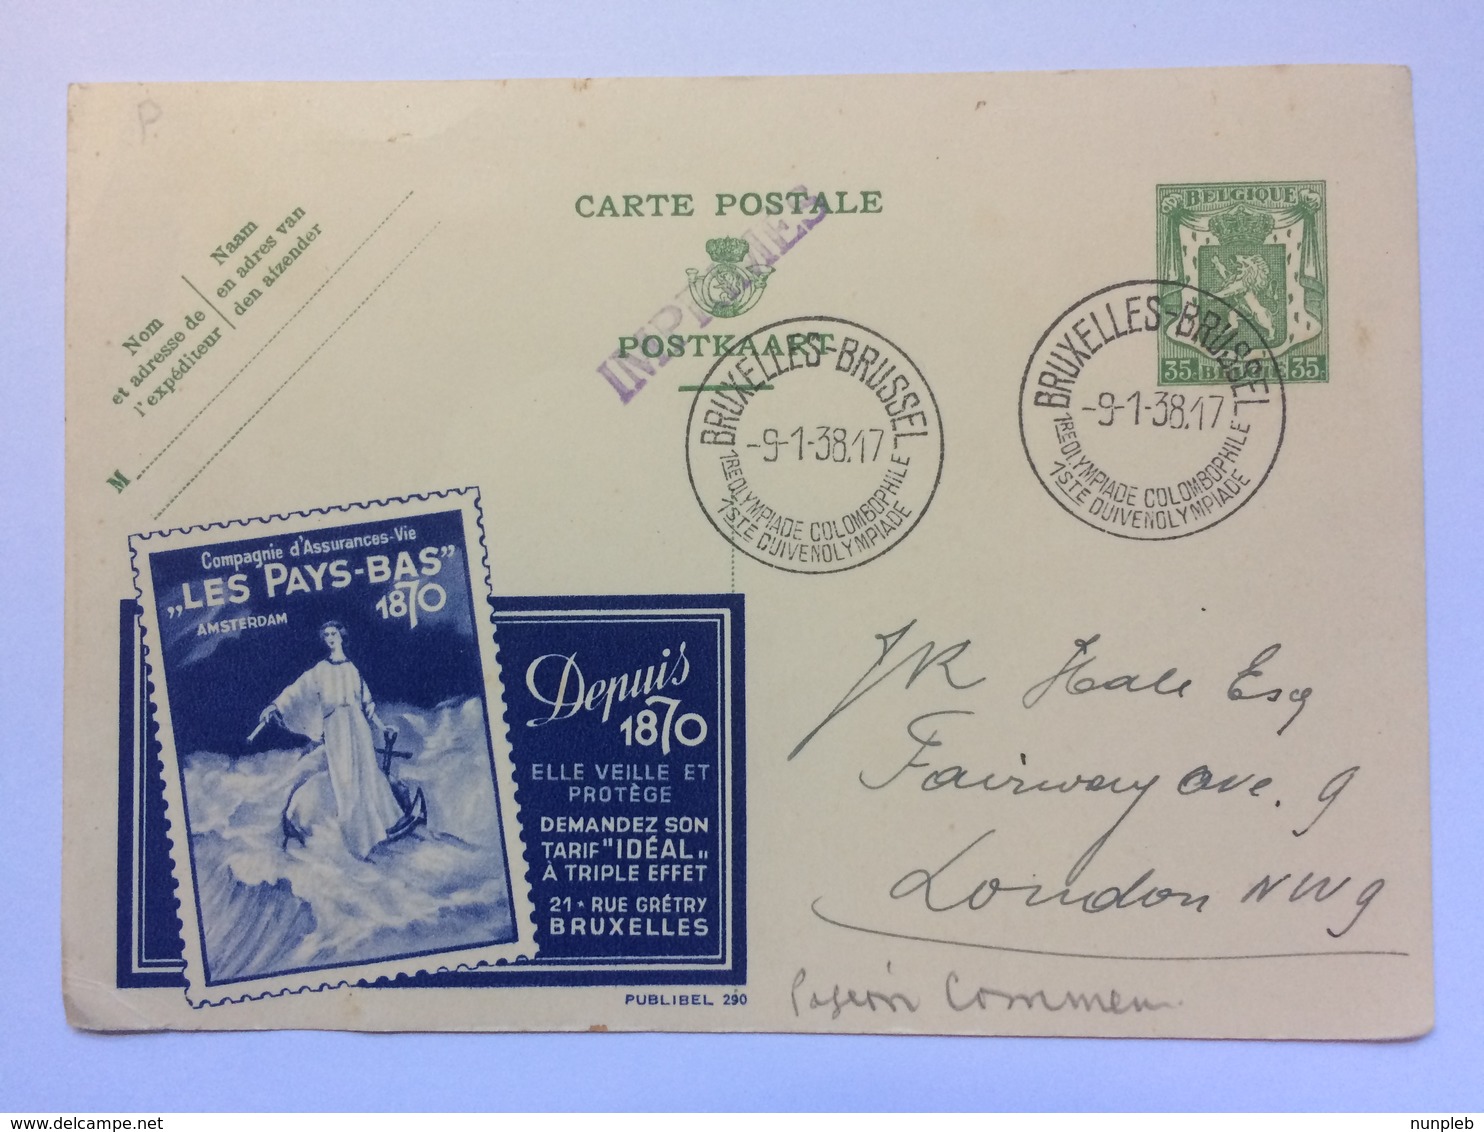 BELGIUM - 1938 Carte Postale  Imprimme With Handstamp For Pigeon Olympics - Olympiade Colombophile - Illustrated - Covers & Documents